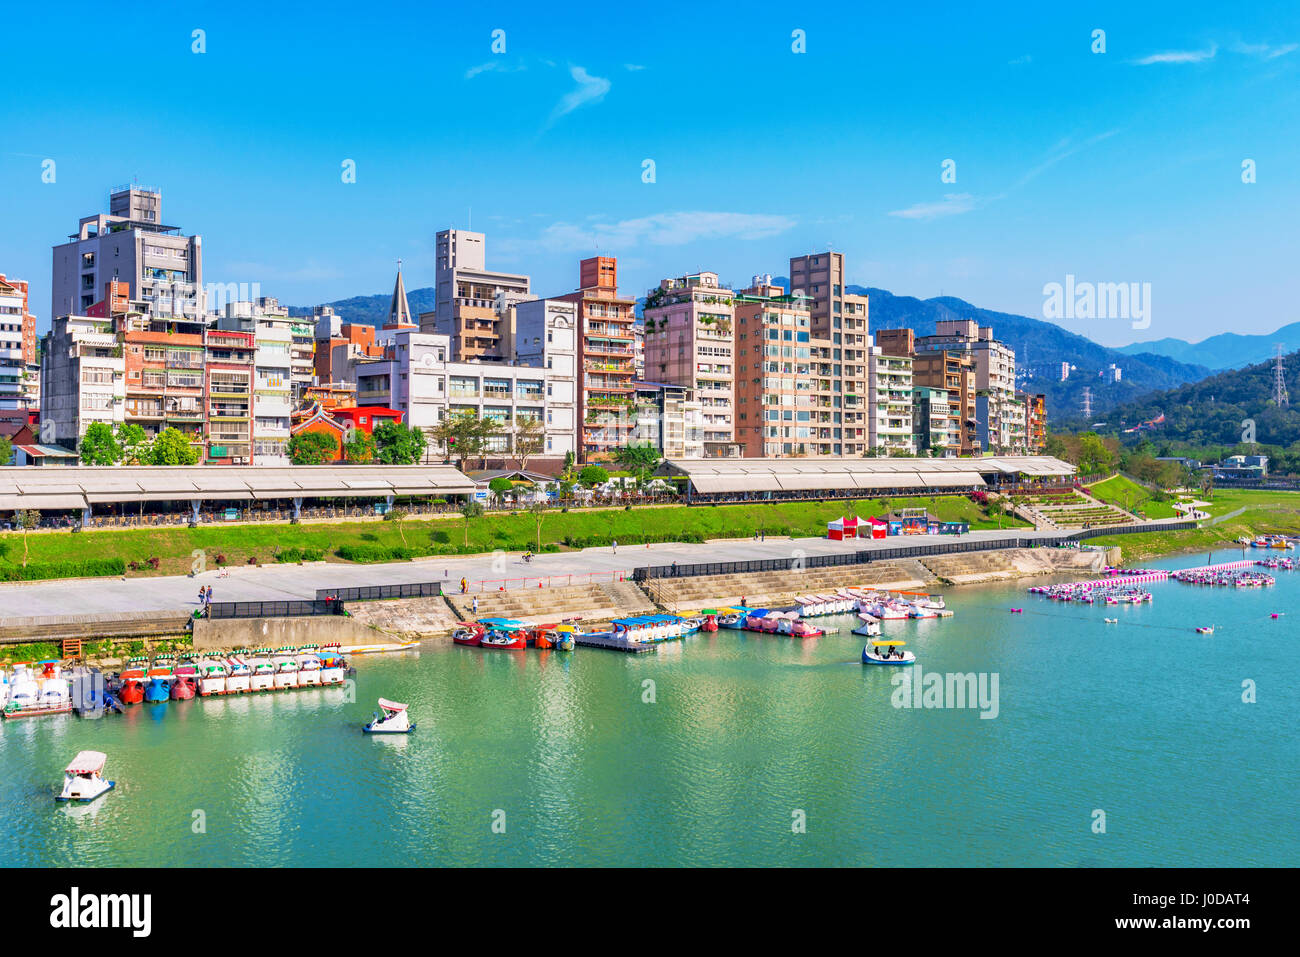 Riverside city buildings in the Xindian district of Taipei Stock Photo